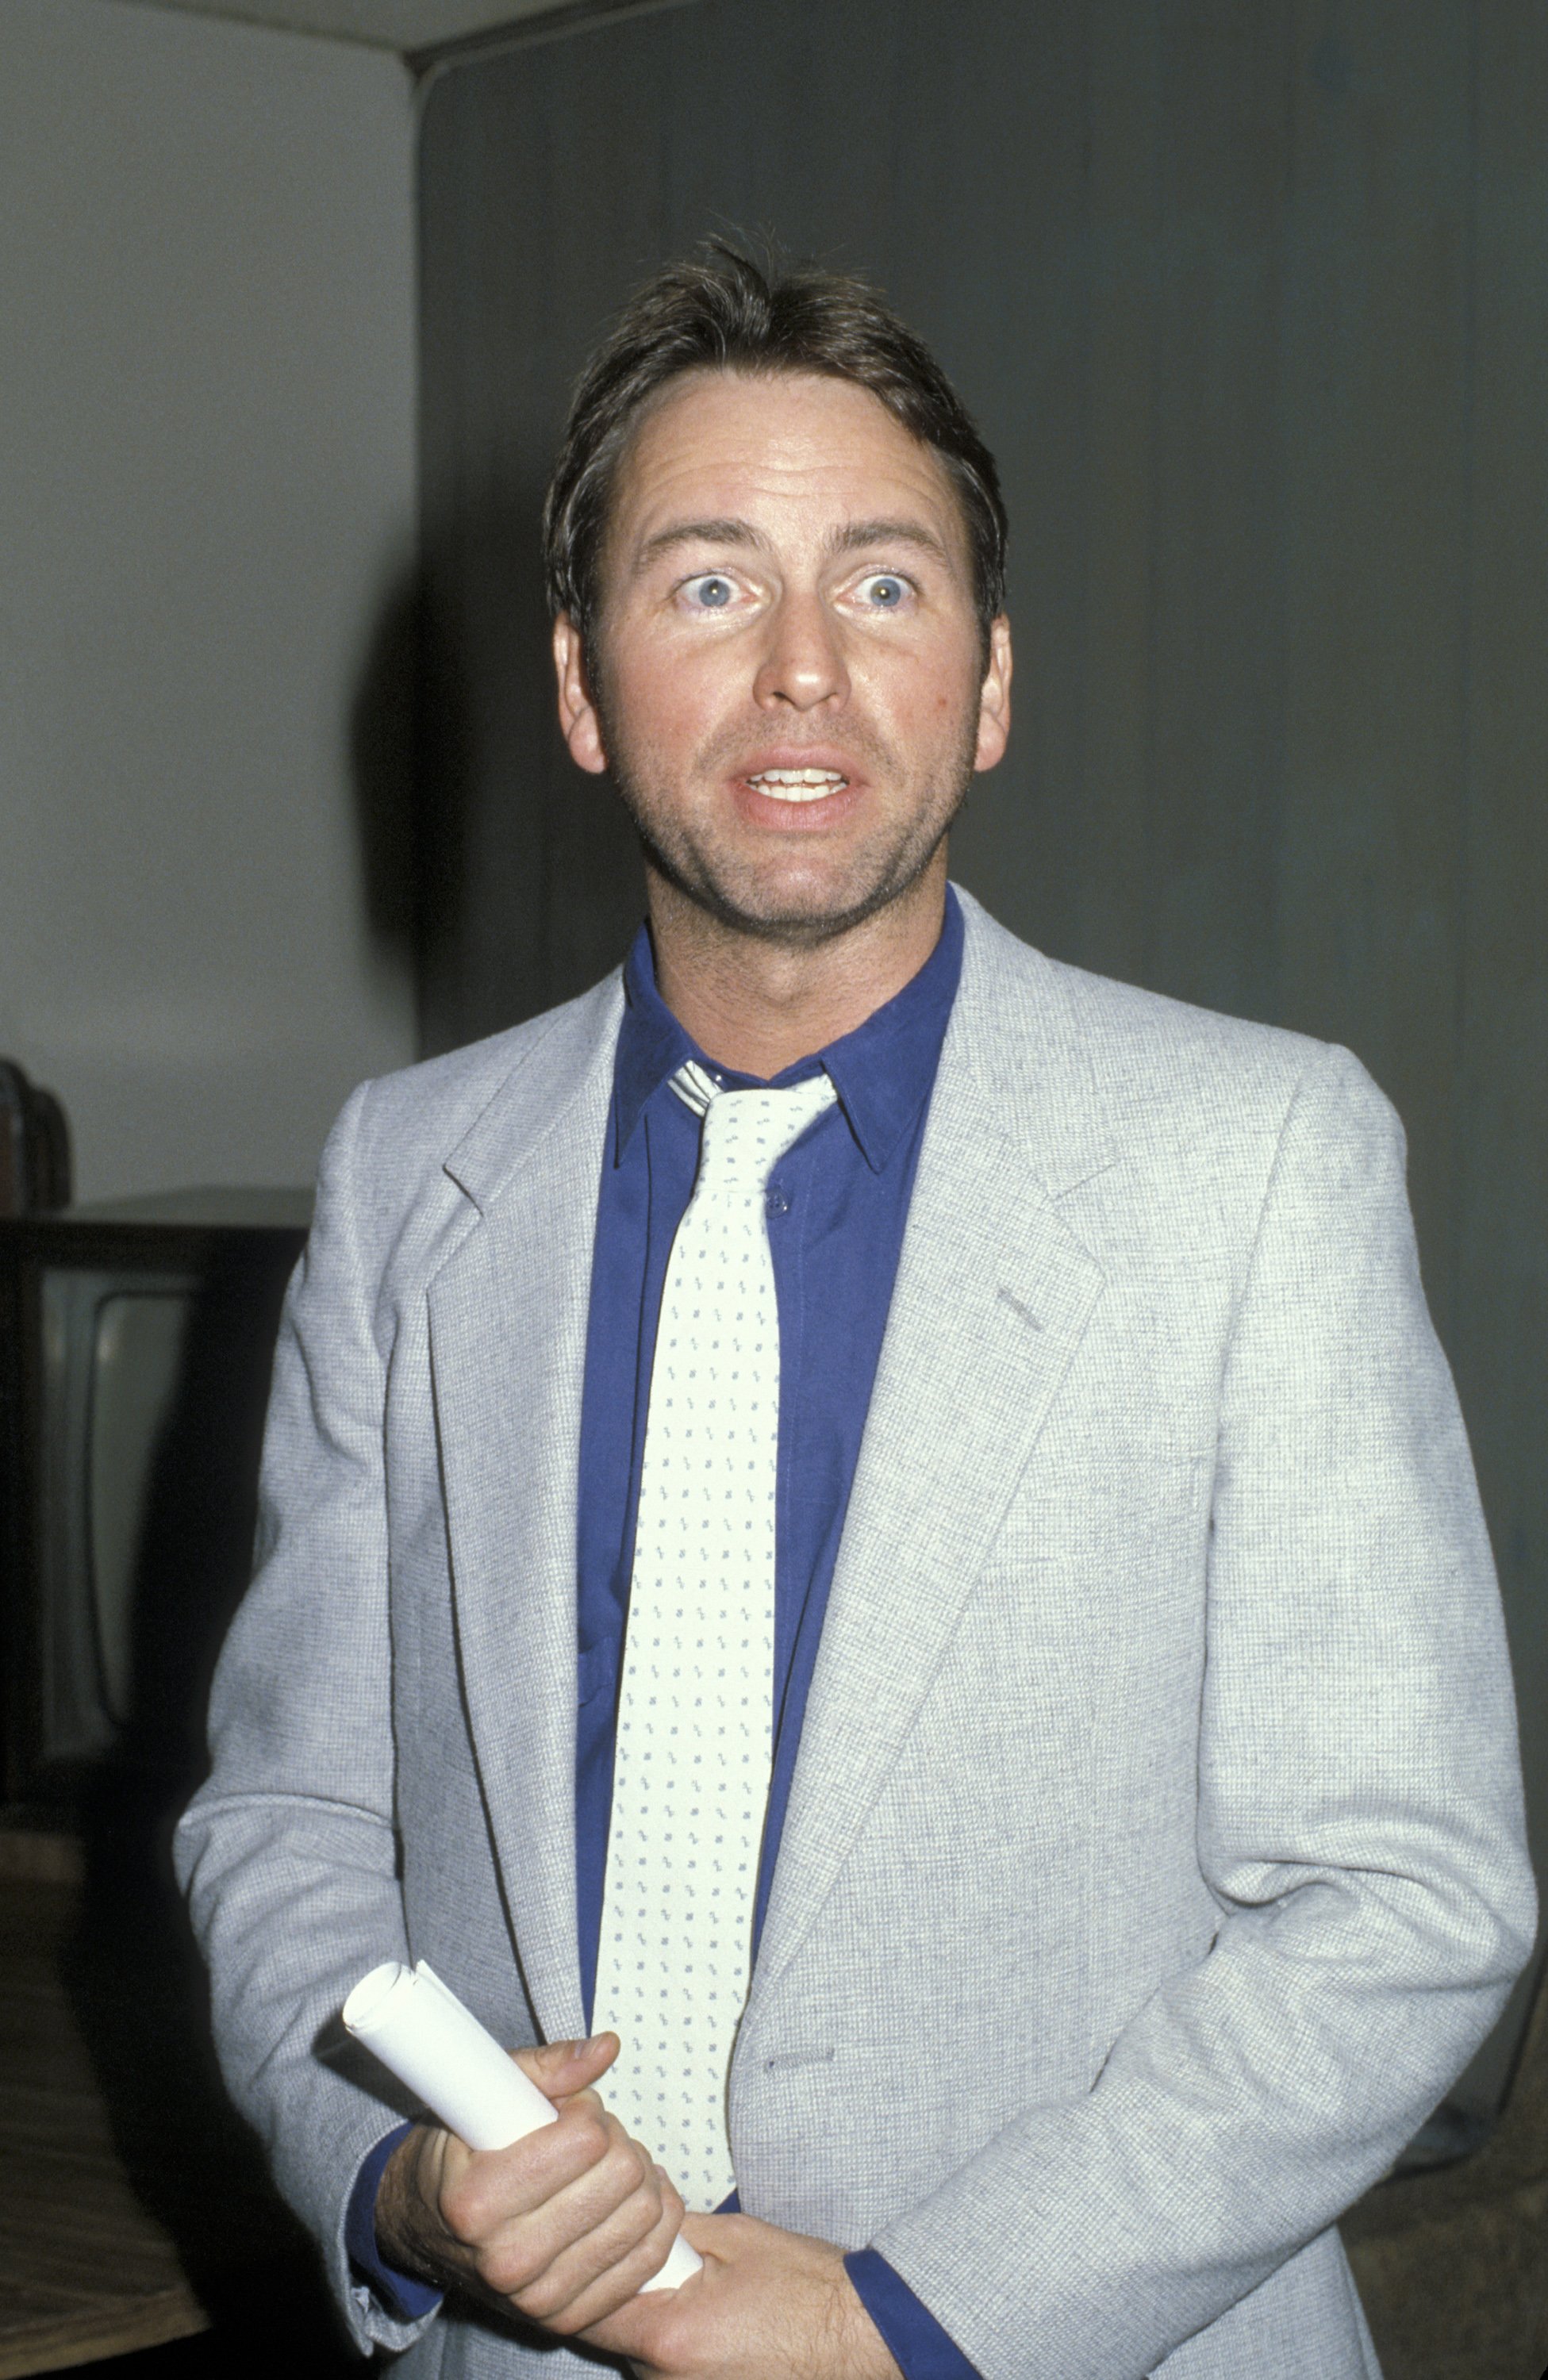 John Ritter during "Welcome Home Vets" - February 24, 1986 at The Forum in Los Angeles, California, United States. | Source: Getty Images